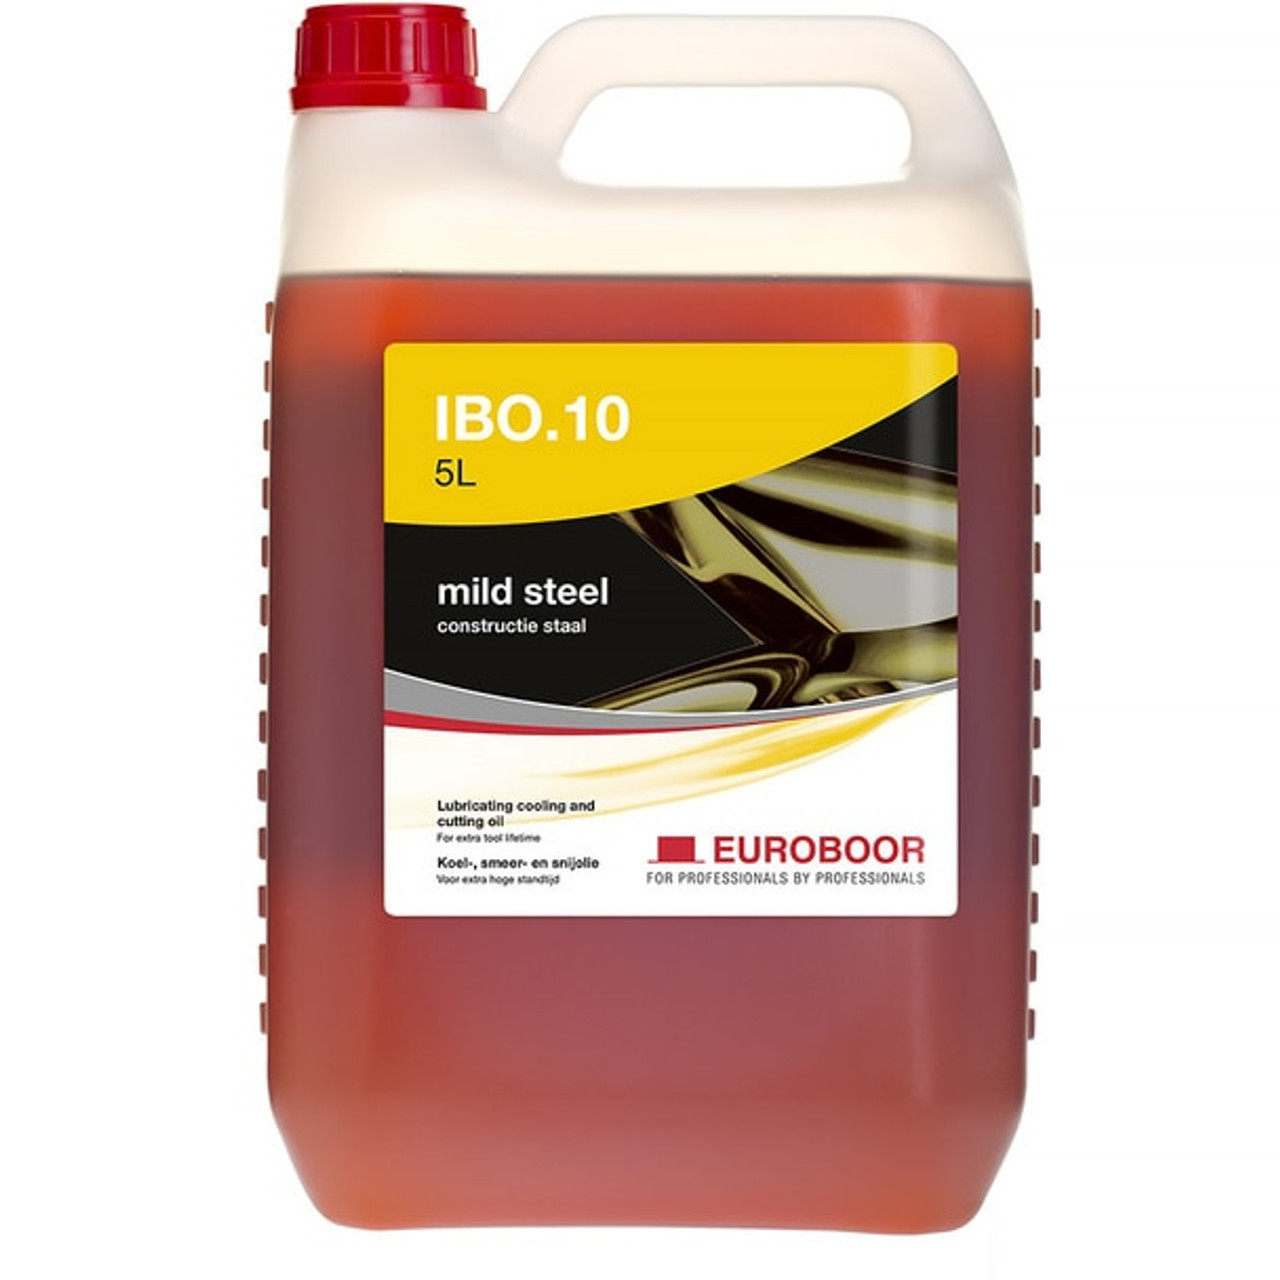 Euroboor Mild Steel cooling and cutting Lubricant (5L) IBO.1050